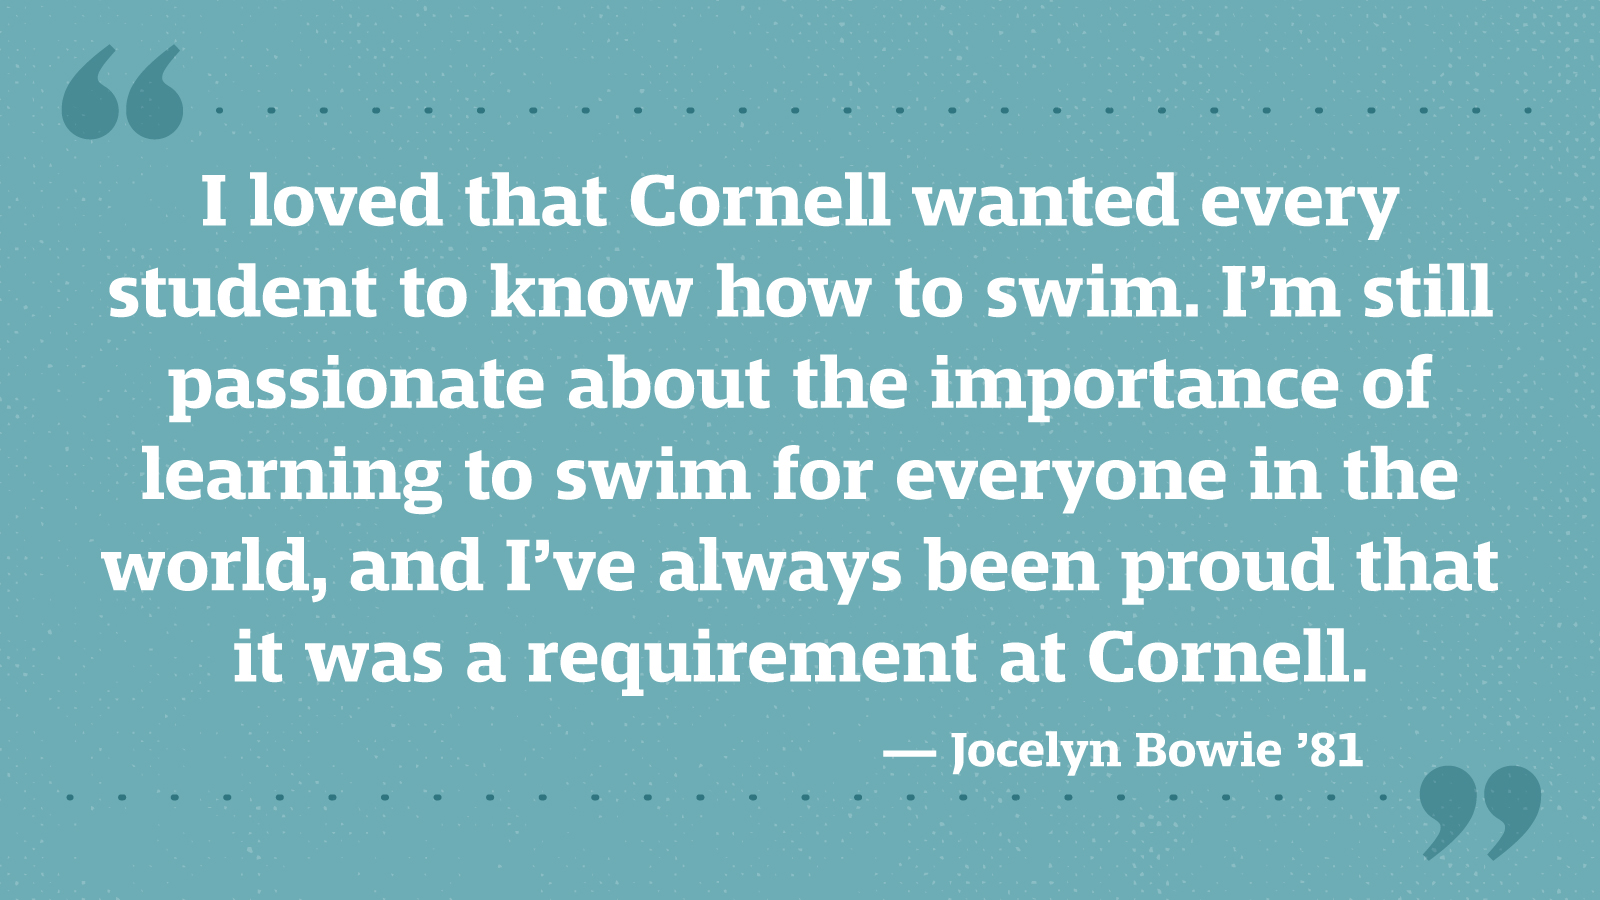 I loved that Cornell wanted every student to know how to swim. I’m still passionate about the importance of learning to swim for everyone in the world, and I’ve always been proud that it was a requirement at Cornell. — Jocelyn Bowie ’81